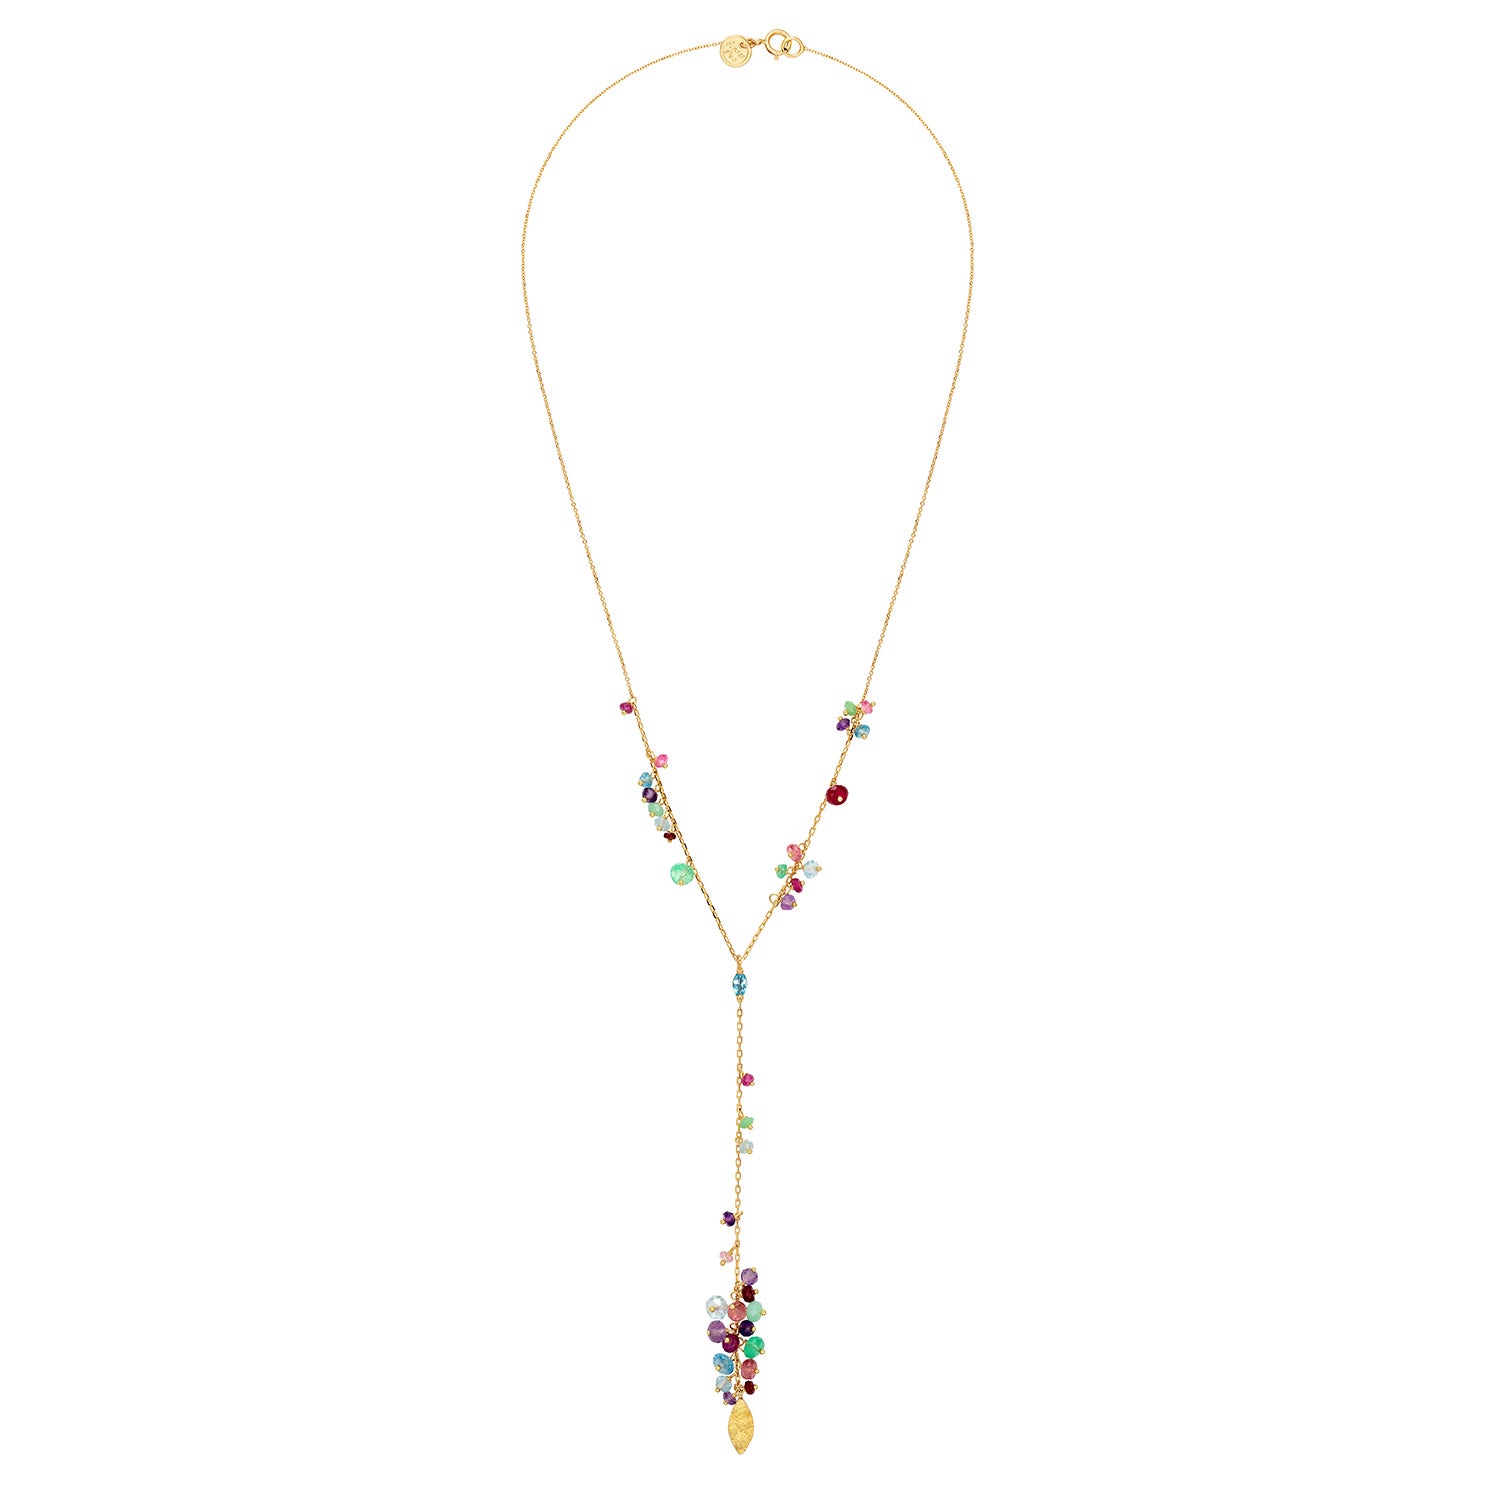 18ct Gold Y shaped necklace with claw set Swiss blue Topaz and clusters of mixed stones with a Gold leaf pendant.